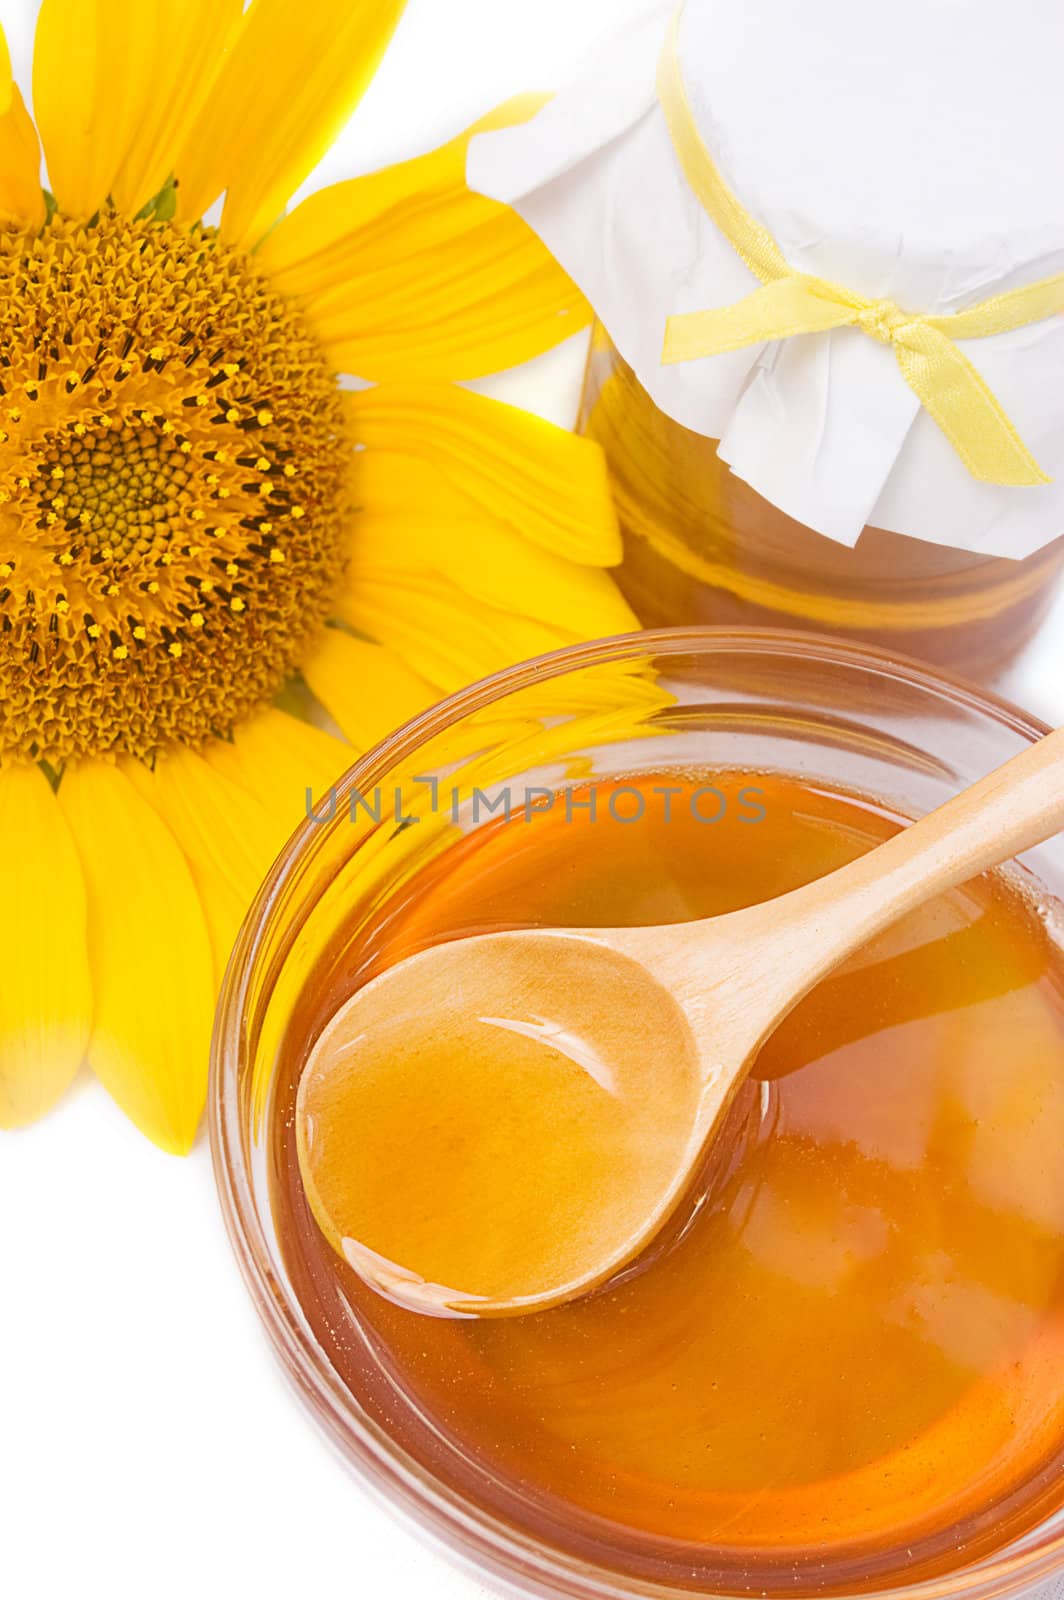 Honey in jar with wooden spoon and sunflower